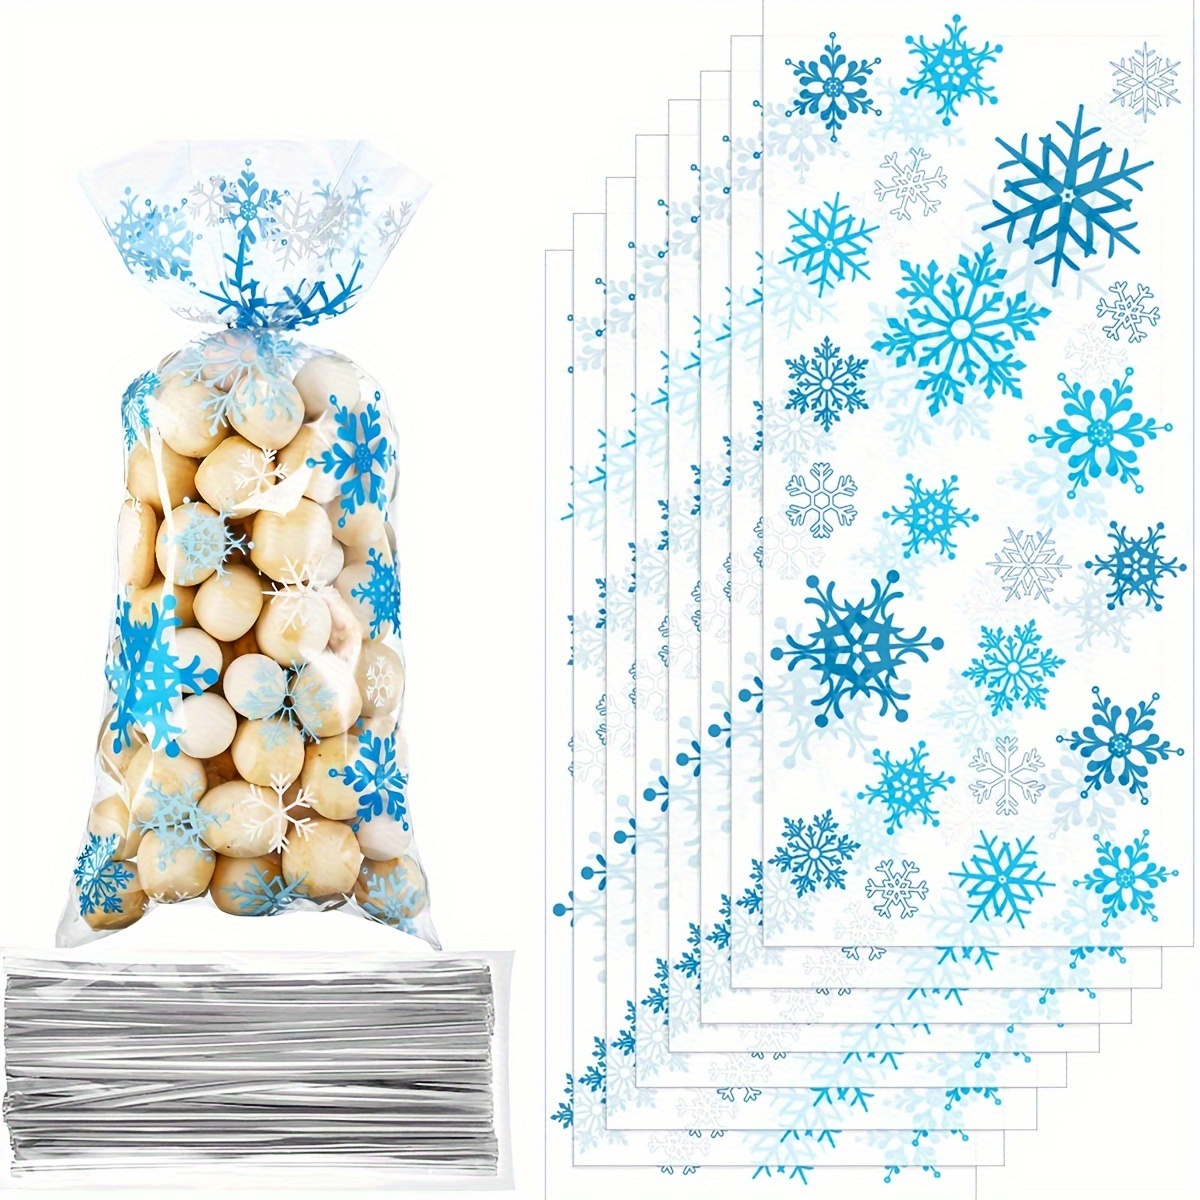 

50pcs, Christmas Cellophane Bags, Winter Snowflake Holiday Treat Bags, Blue Plastic Candy Goodie Bags With Twist Ties For Winter Xmas Wonderland Birthday Holiday Party Favors